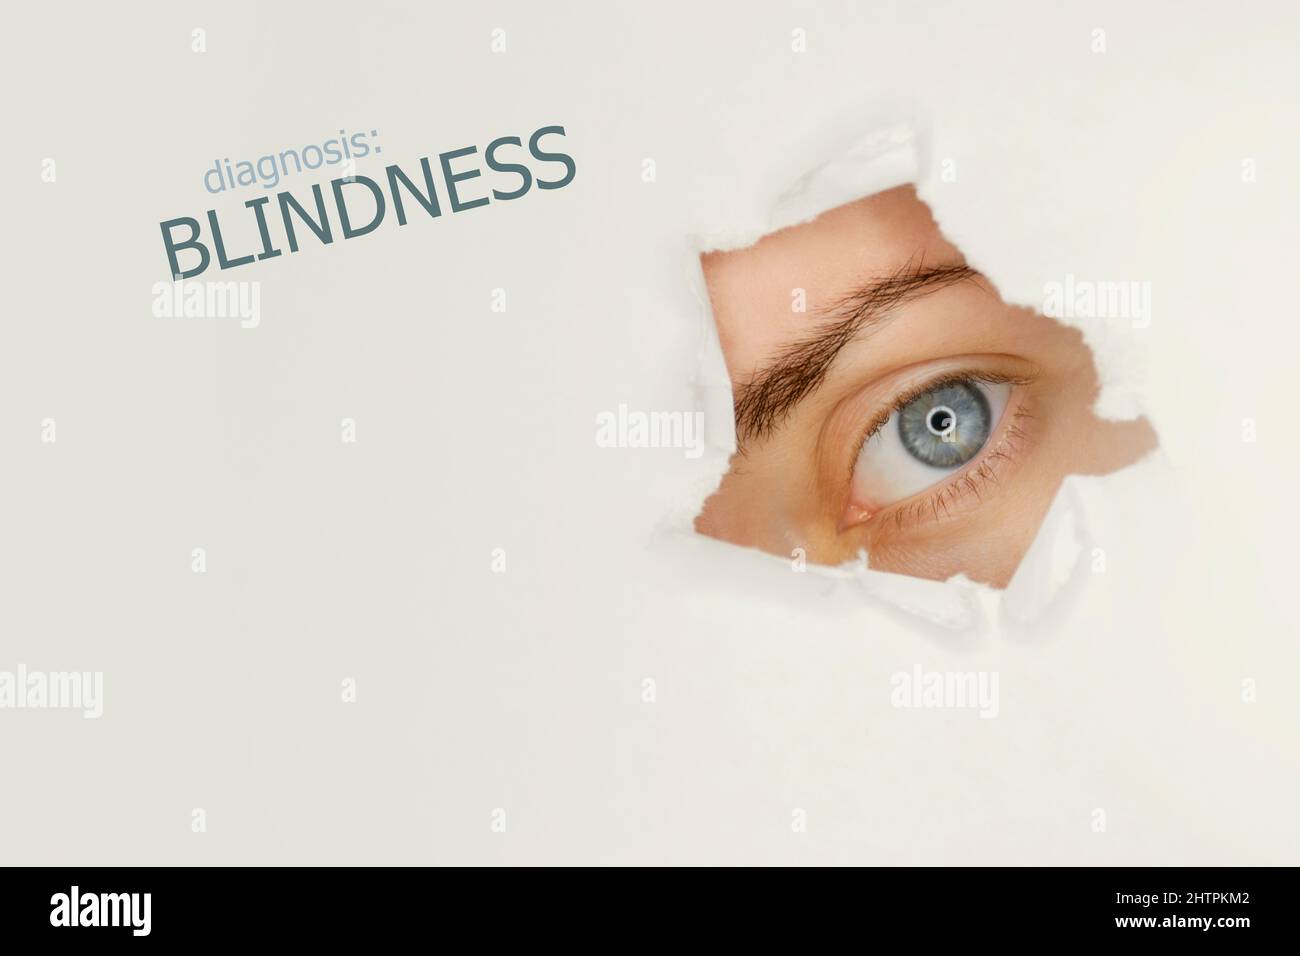 Blindness disease poster with blue eye on right.Studio grey background Stock Photo